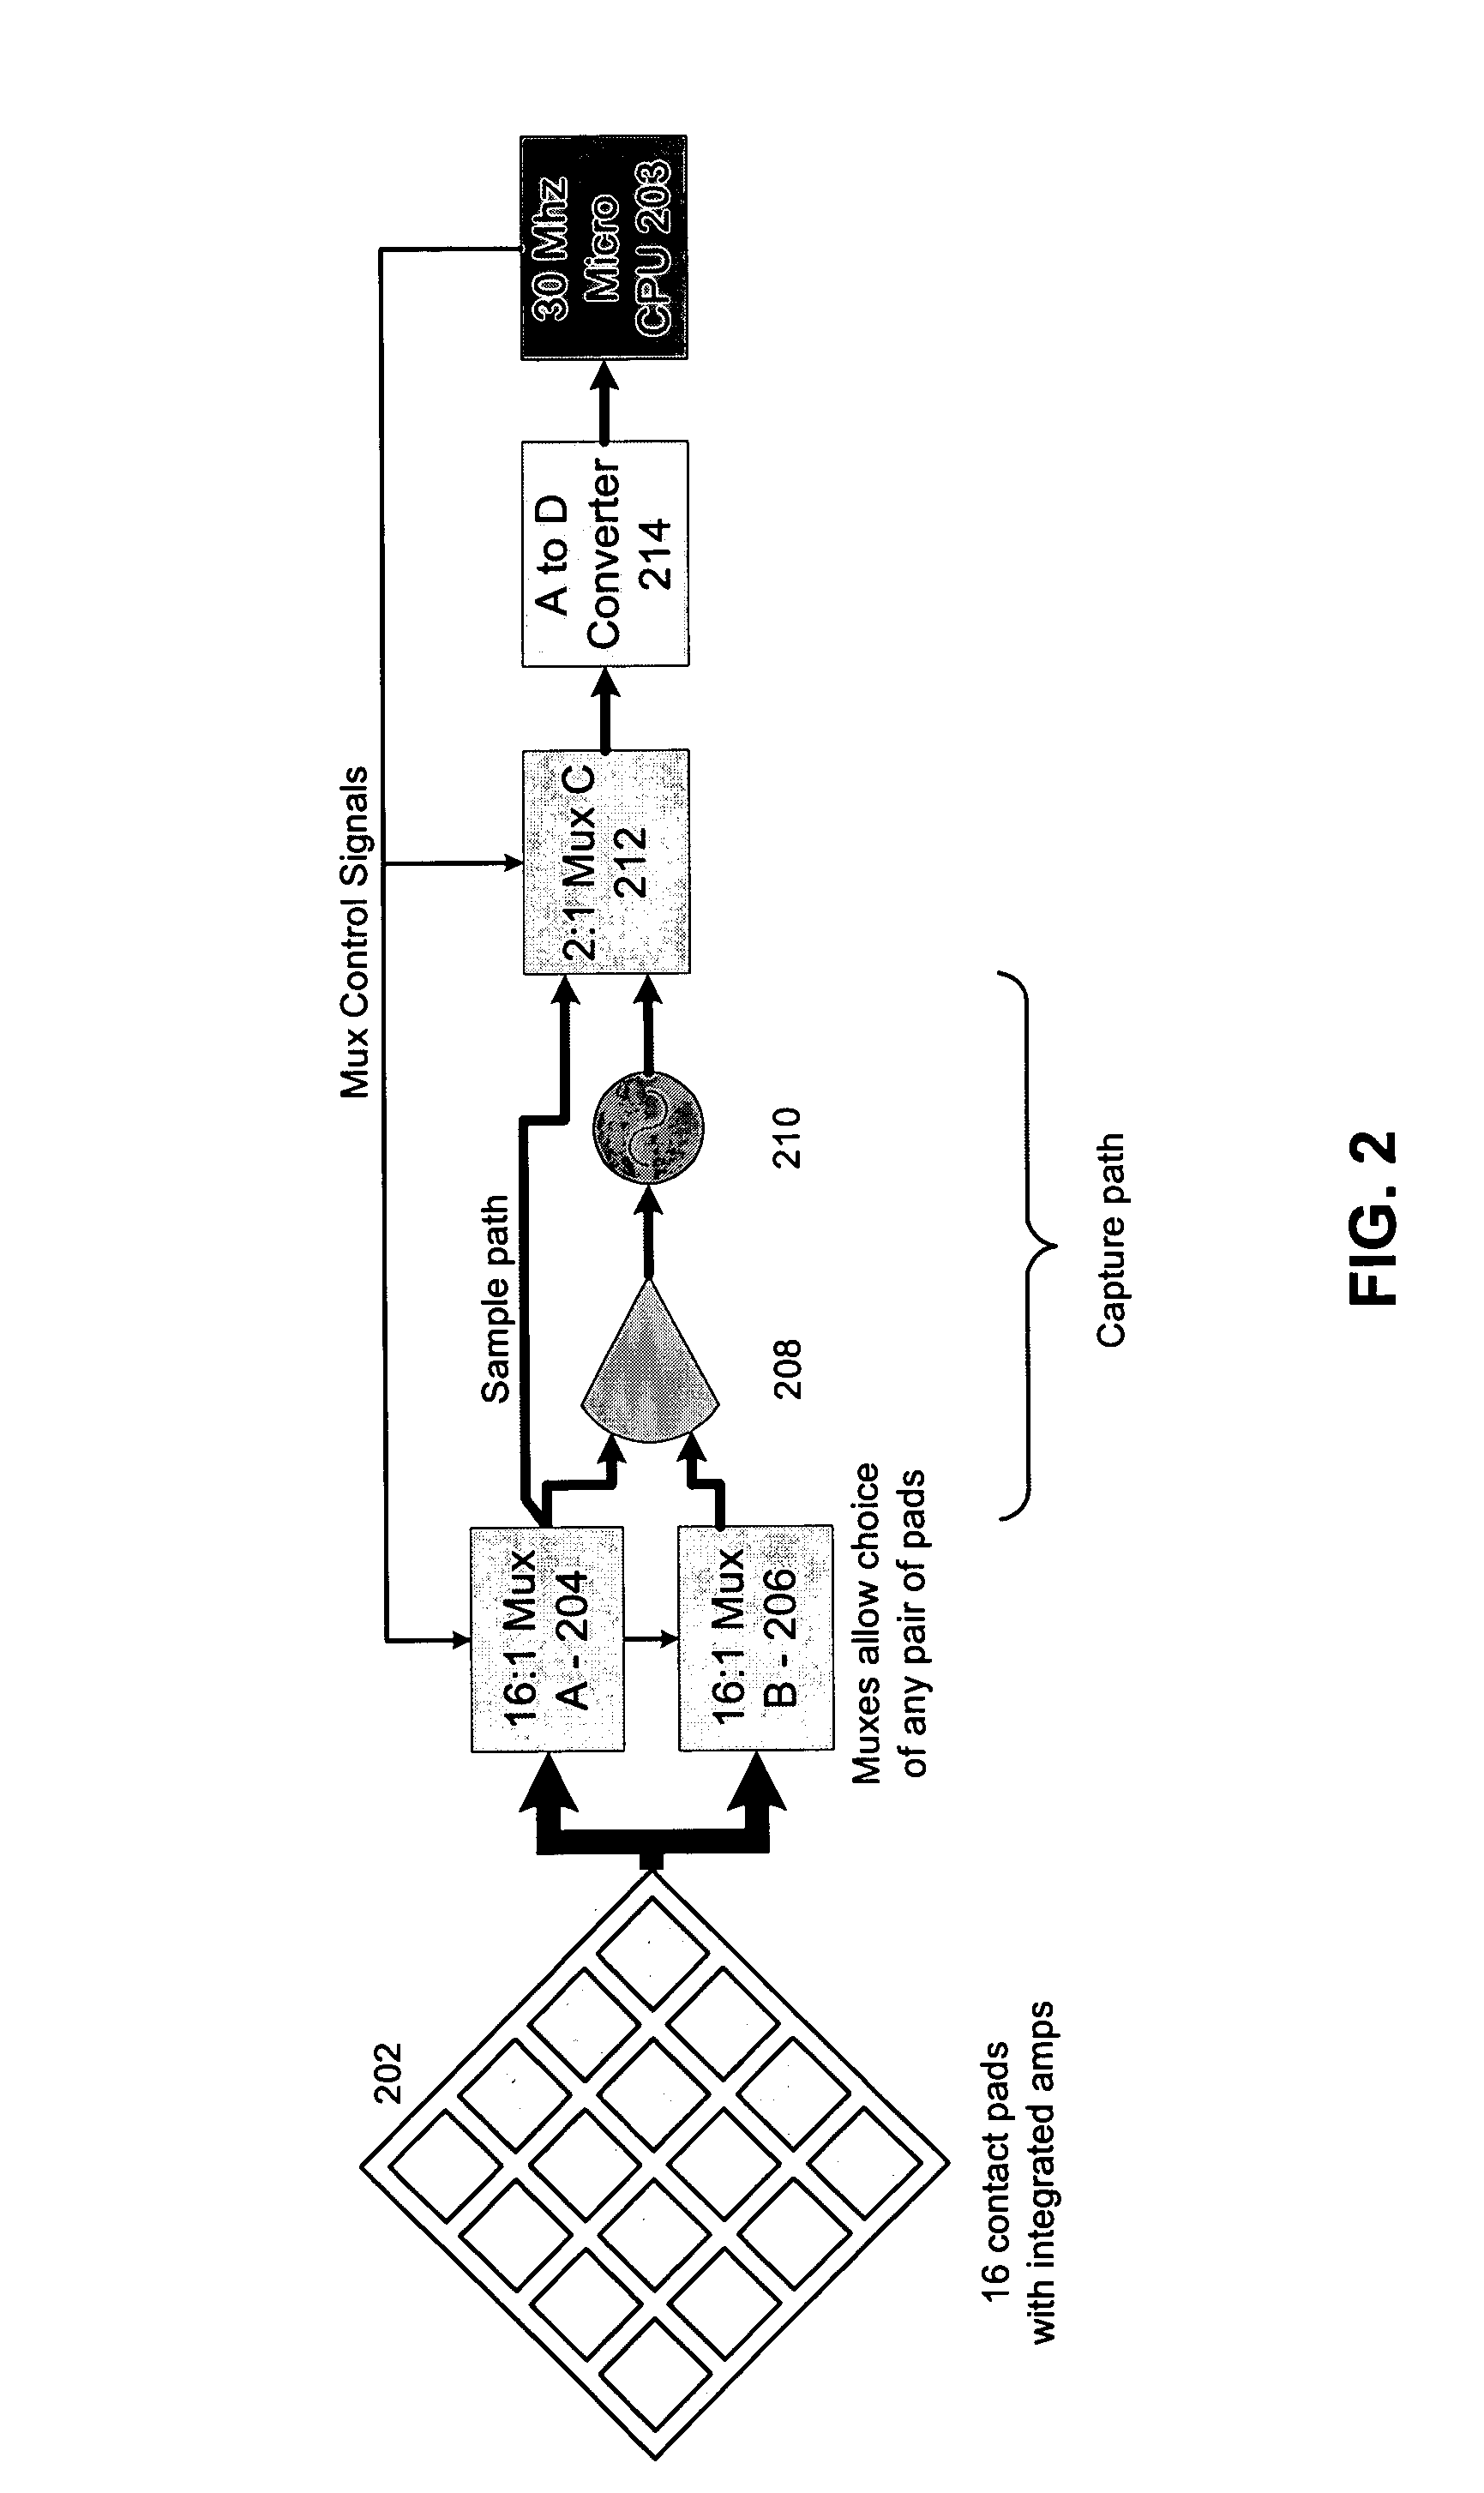 System and method for detecting and analyzing electrocardiological signals of a laboratory animal